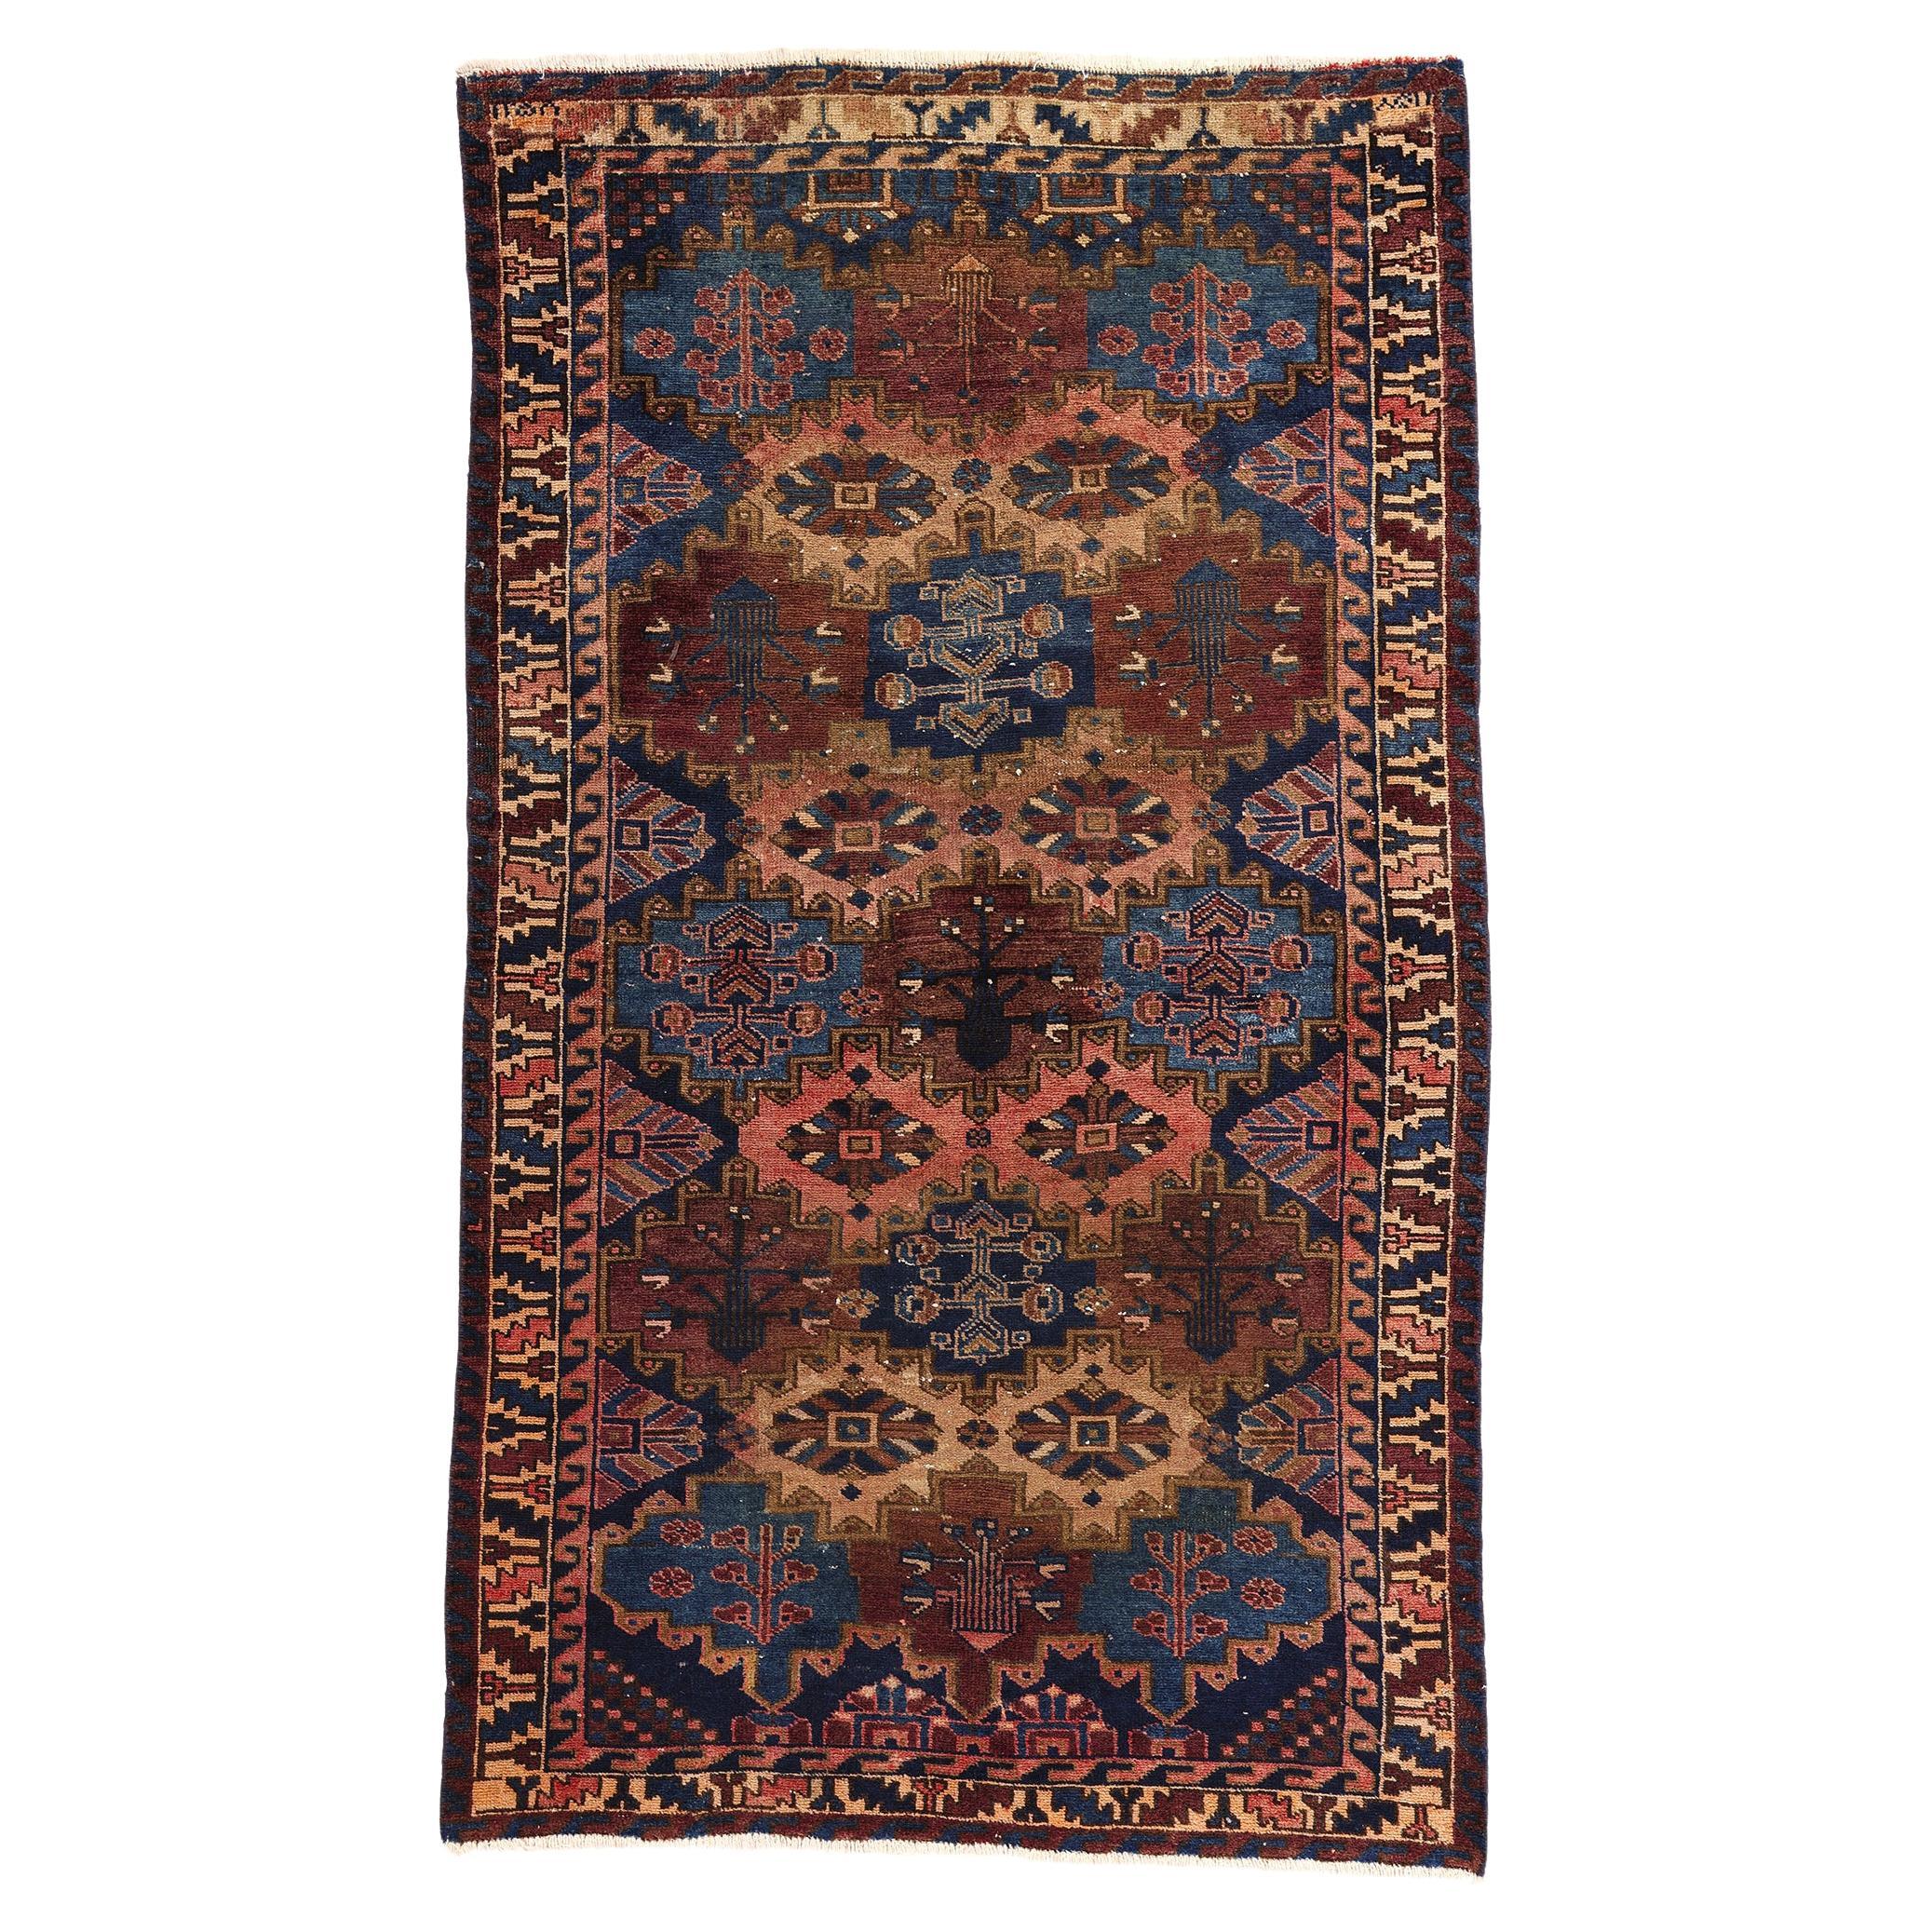 Antique Persian Bakhtiari Rug with Early Victorian Style